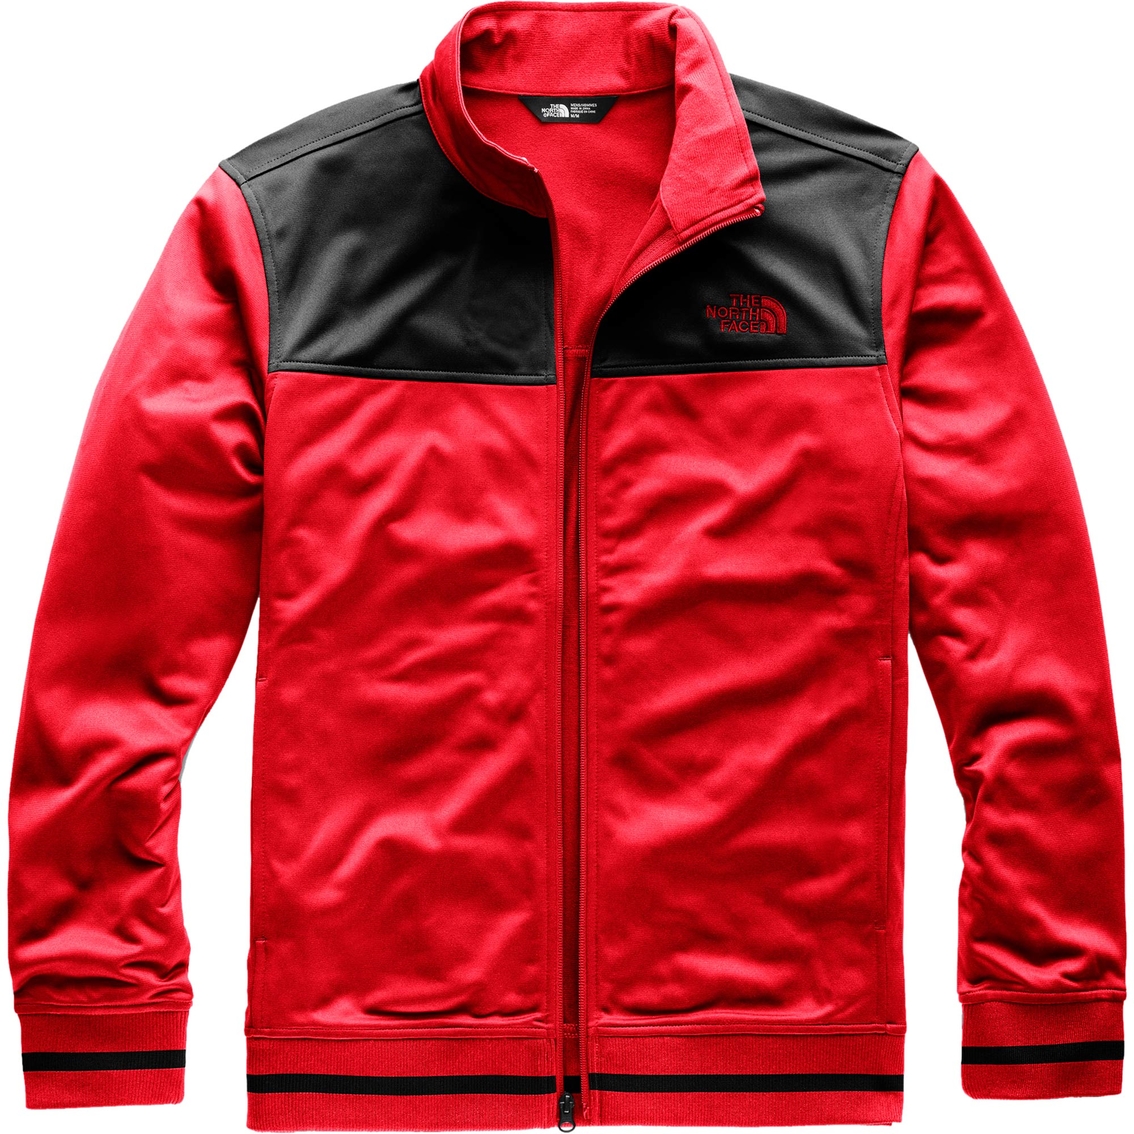 The North Face Alphabet City Jacket | Jackets | Father's Day Shop ...